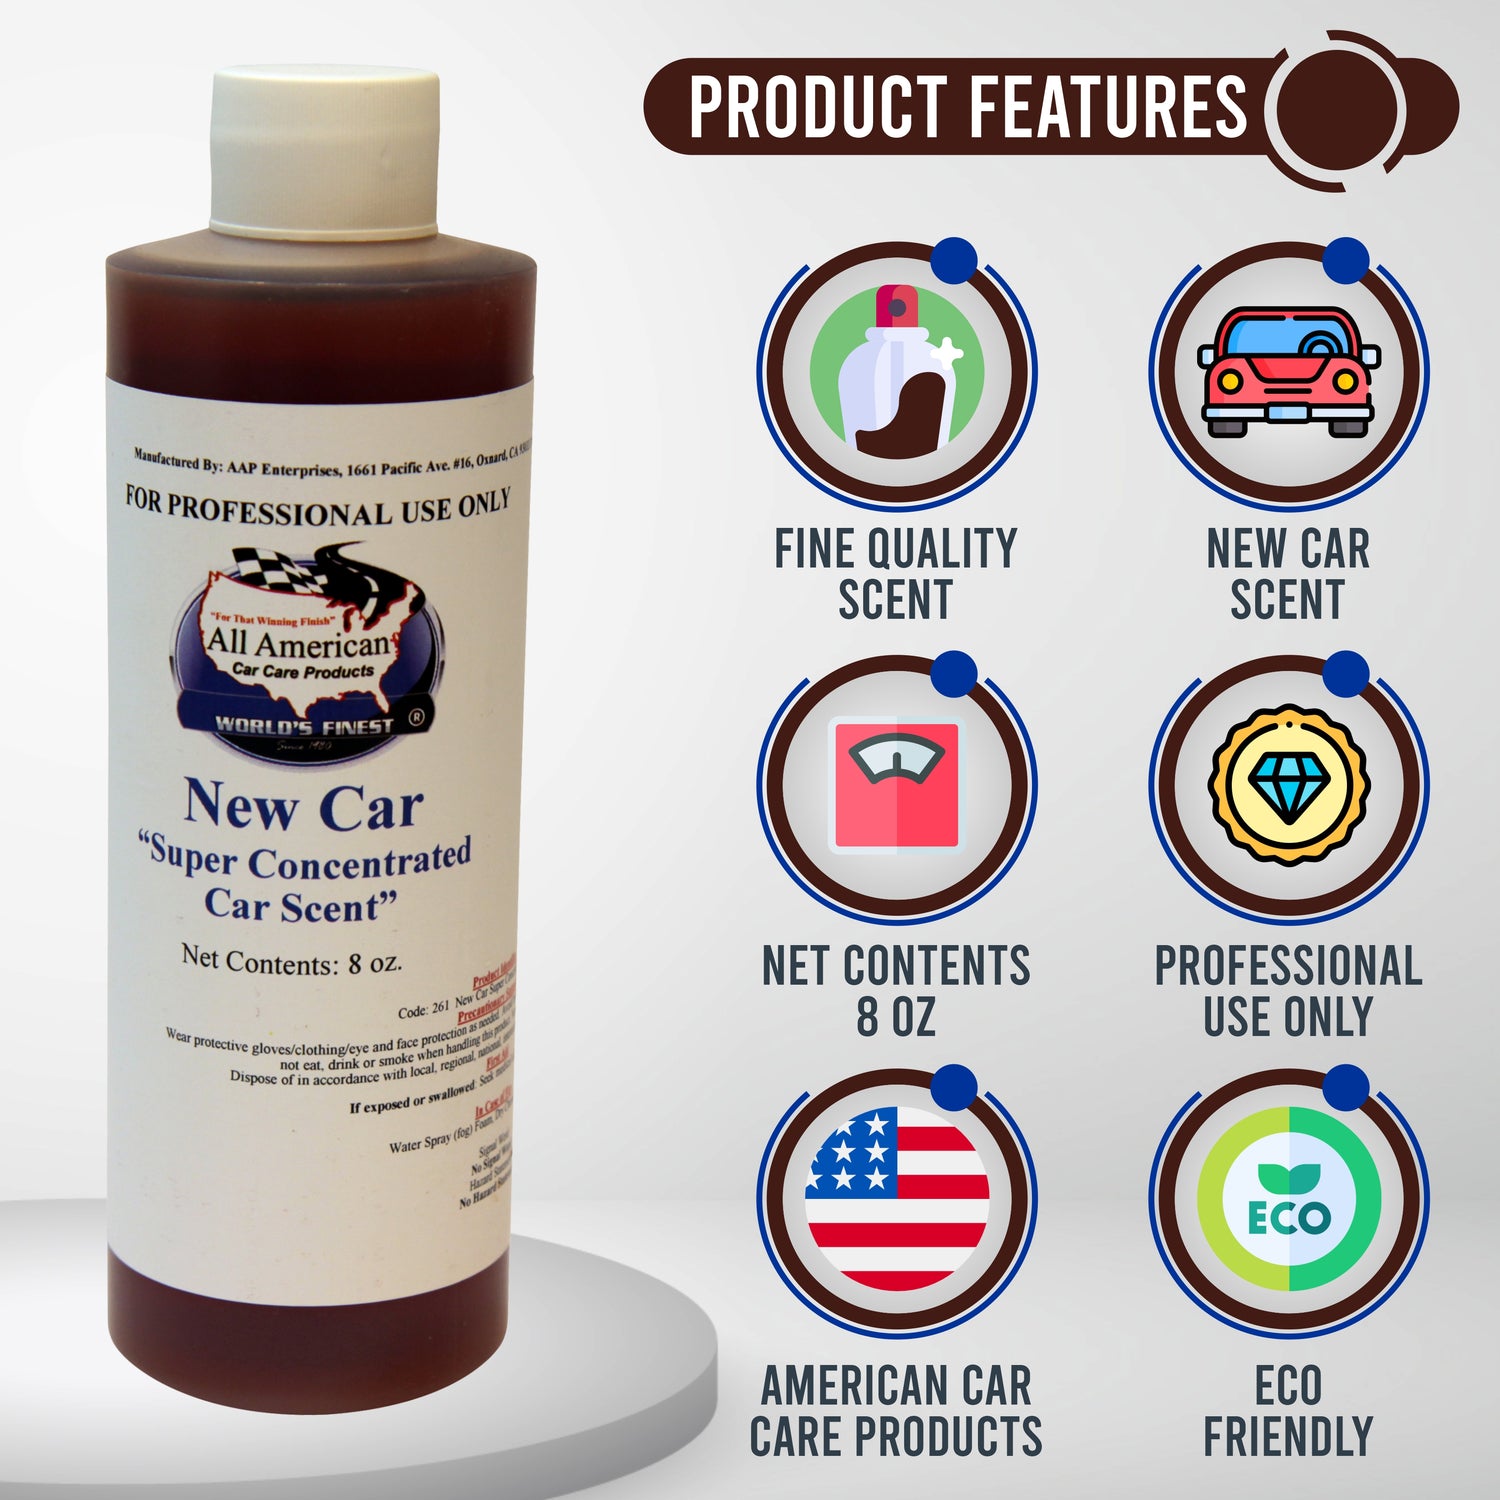 Interior Cleaners – All American Car Care Products